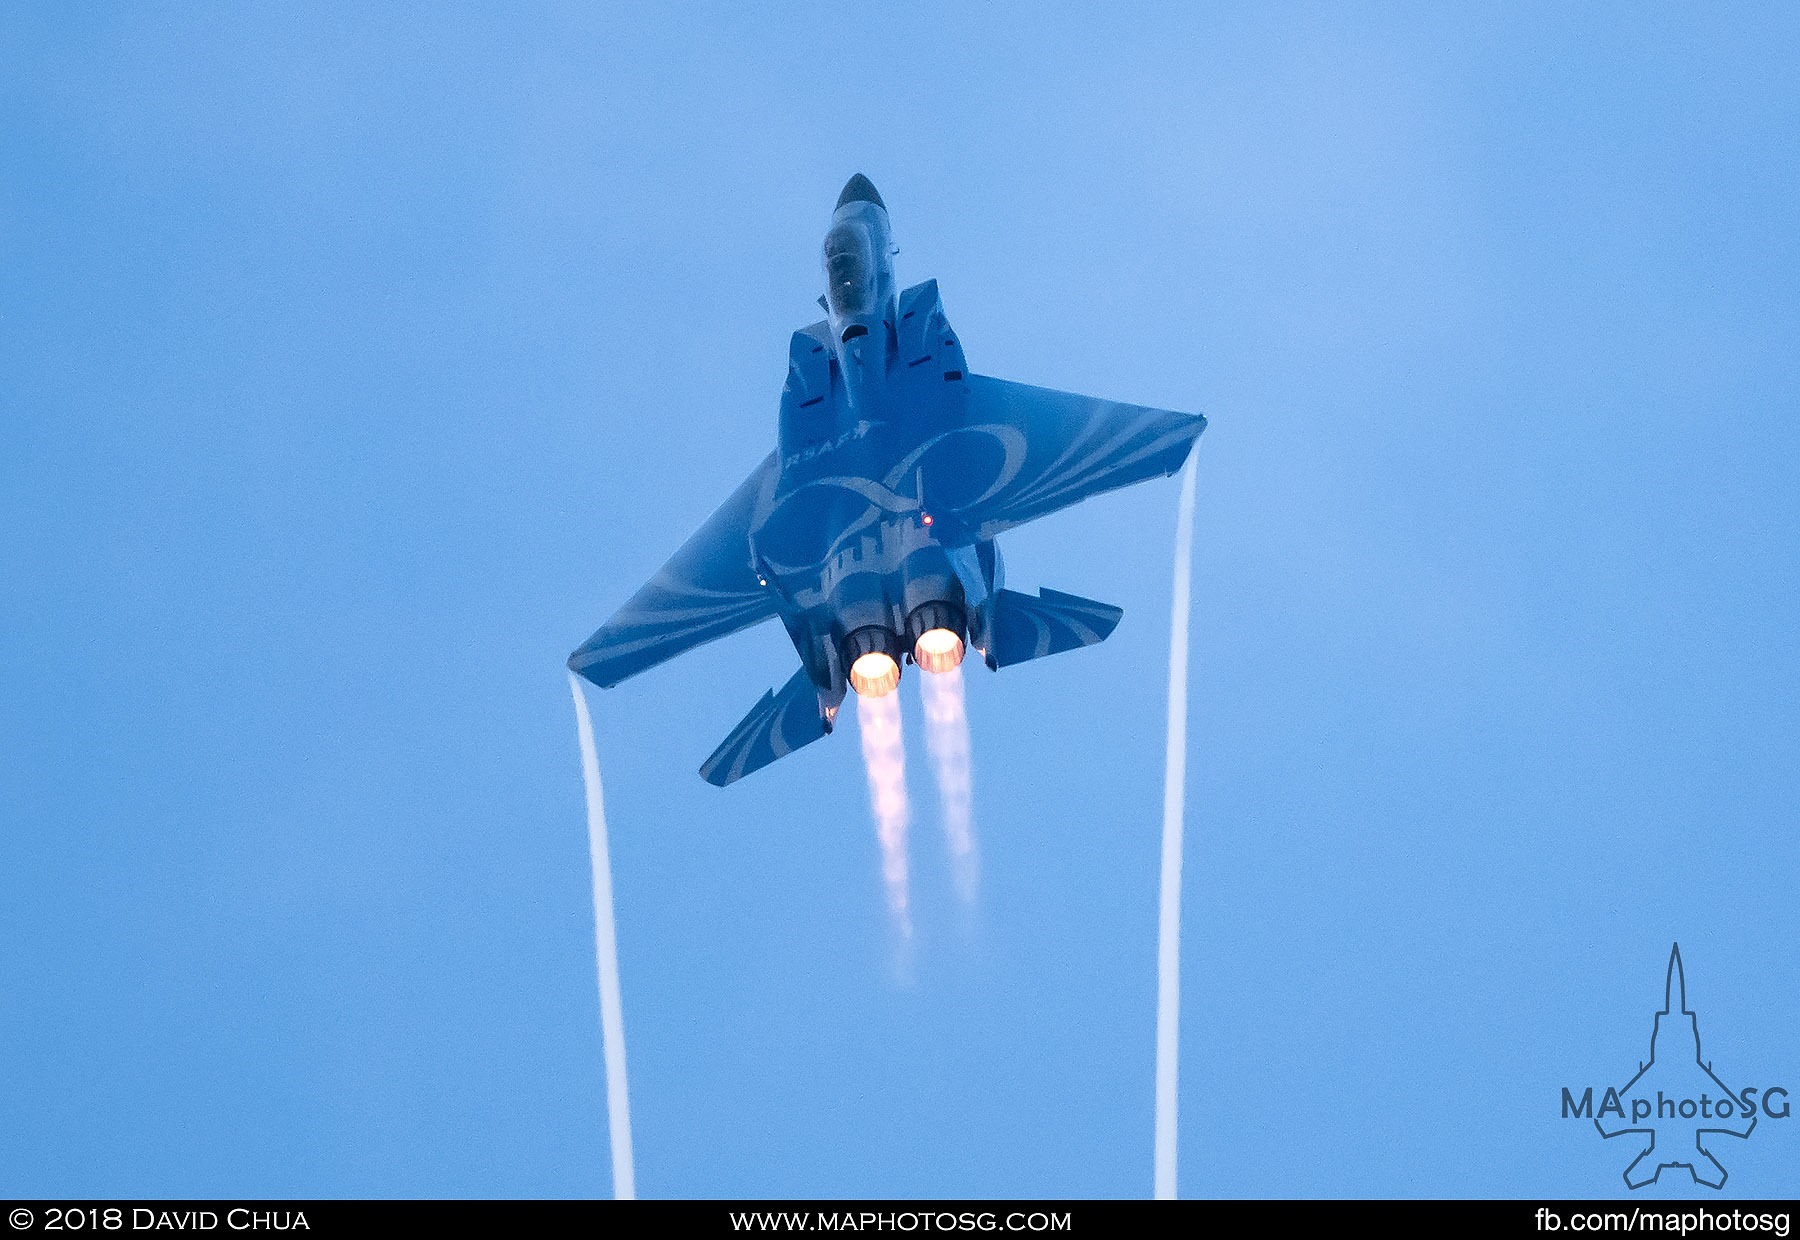 1905 – Ending the aerial display segment. RSAF50 Livery F-15SG Strike Eagle afterburner climb and exit after completing the High-G turn